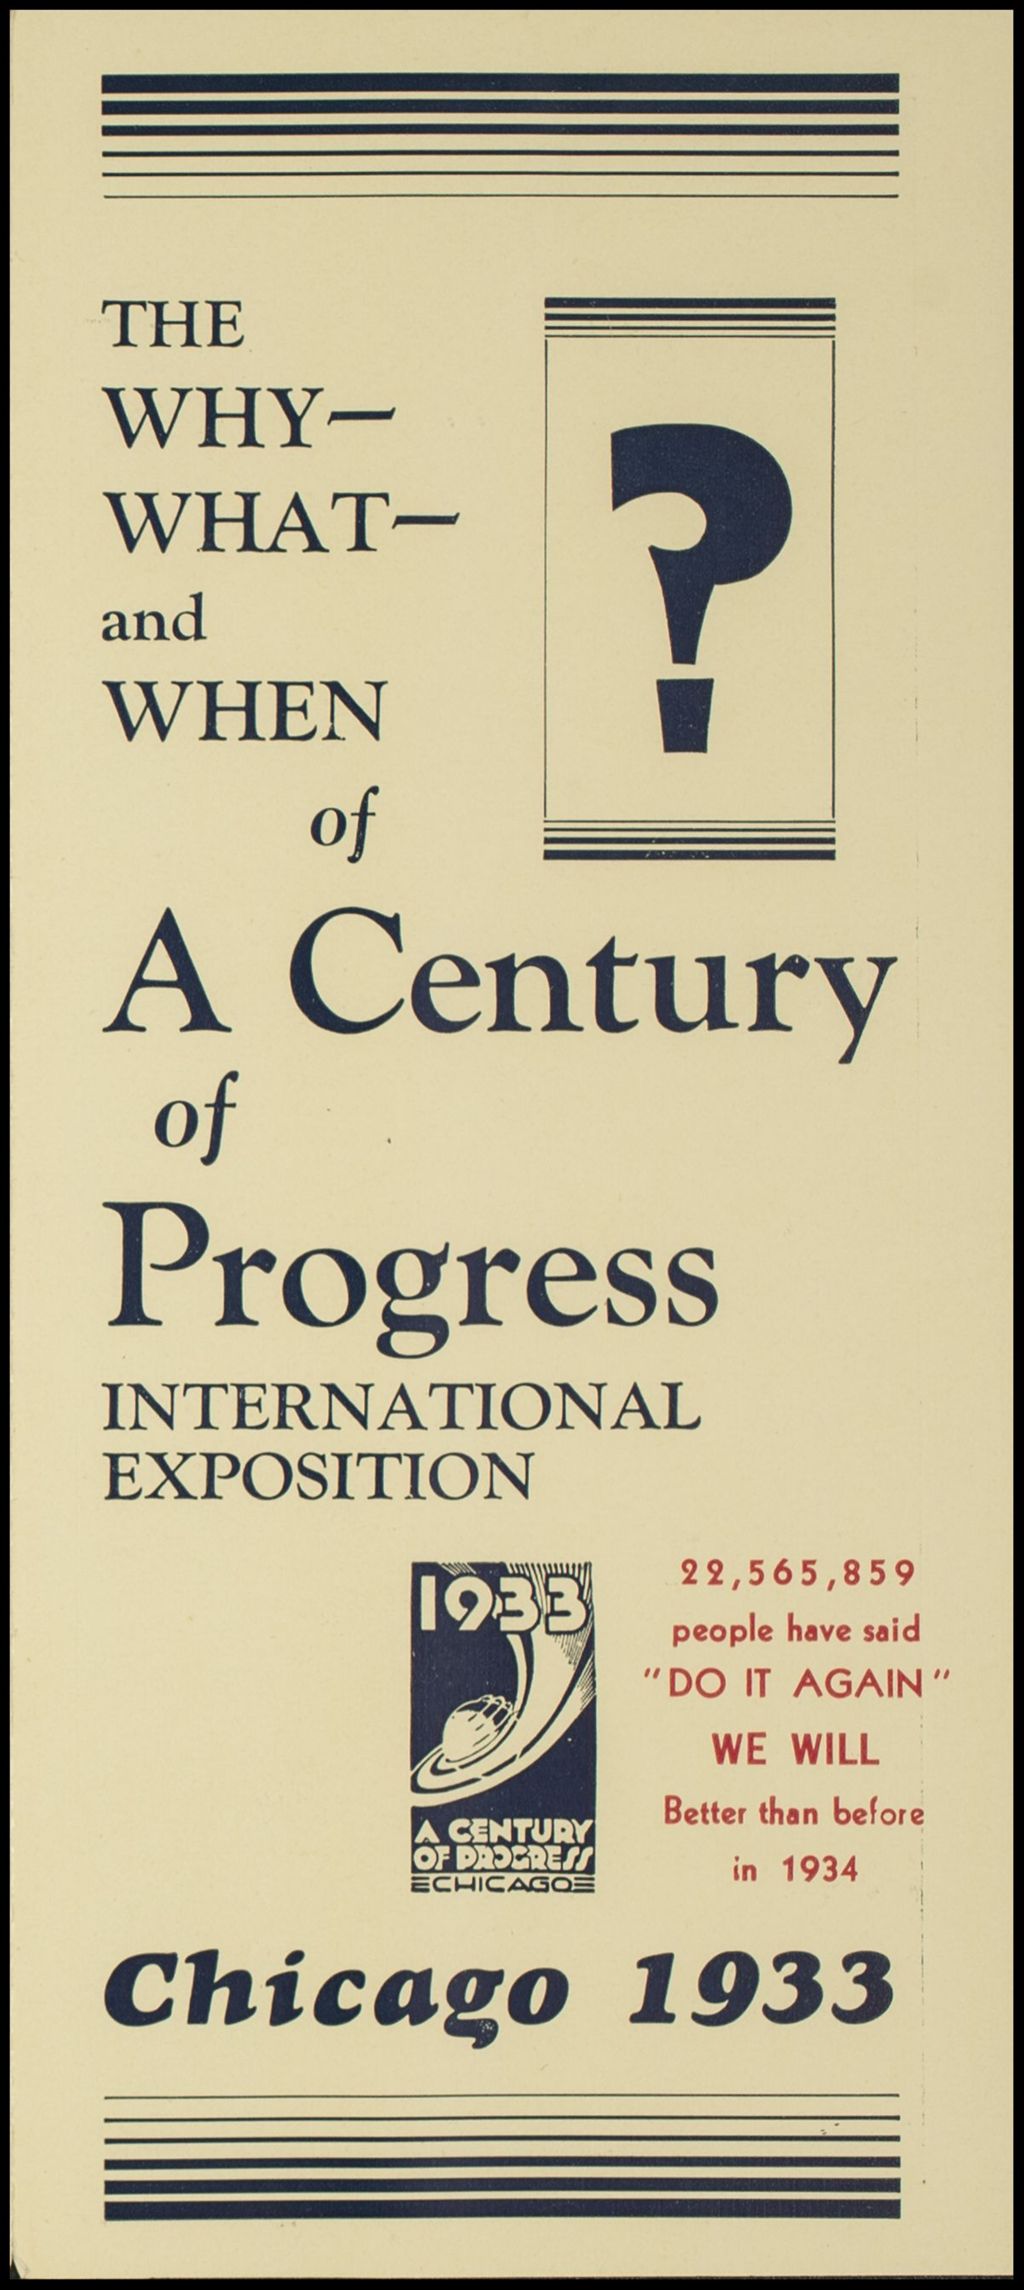 The Why, What and When of A Century of Progress, 1933 (Folder 16-164)